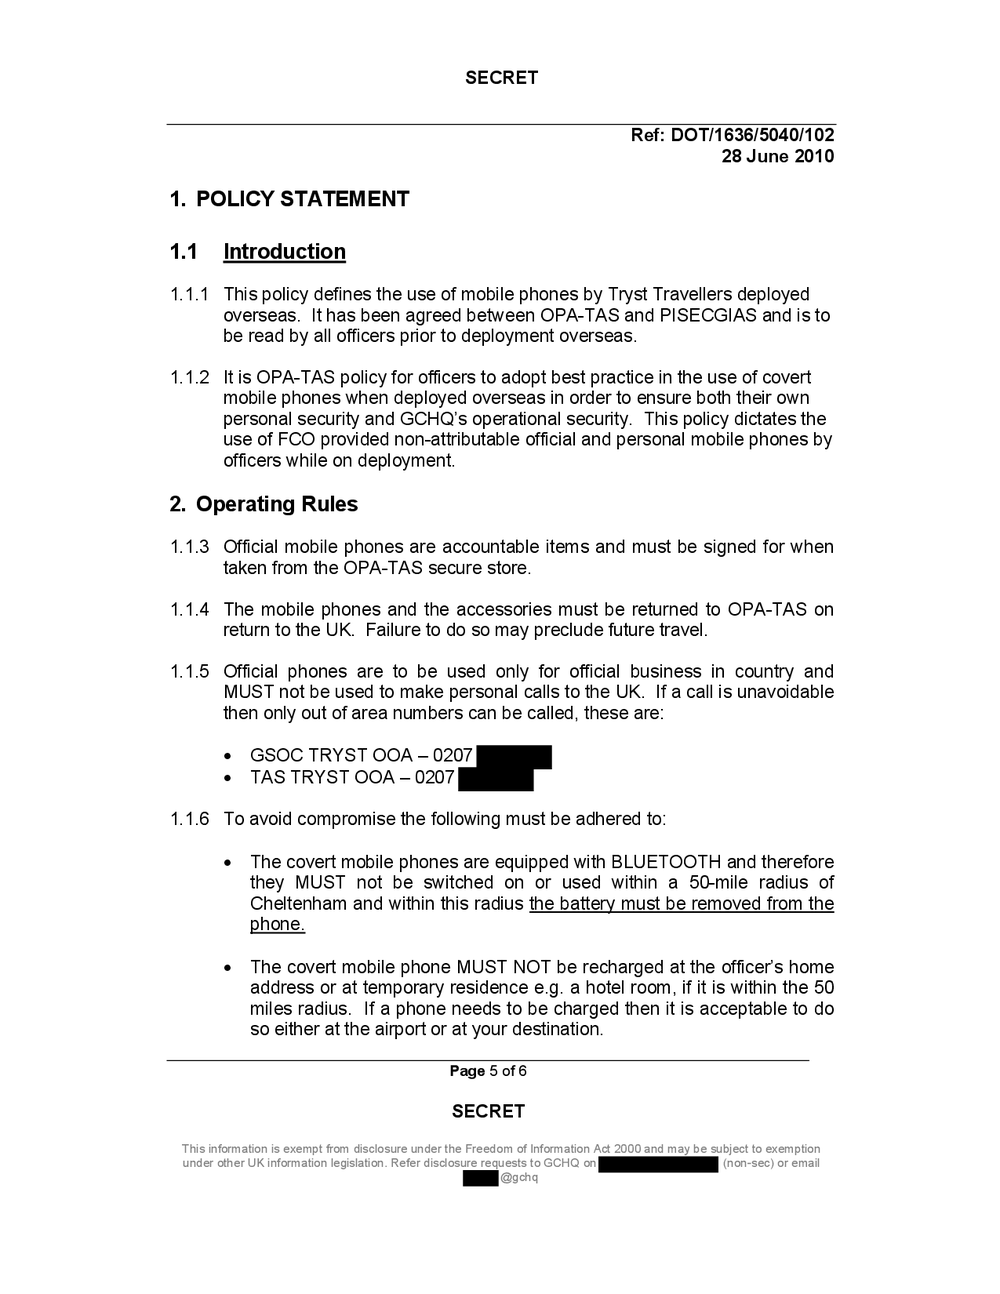 Page 5 from GCHQ Covert Mobile Phones Policy